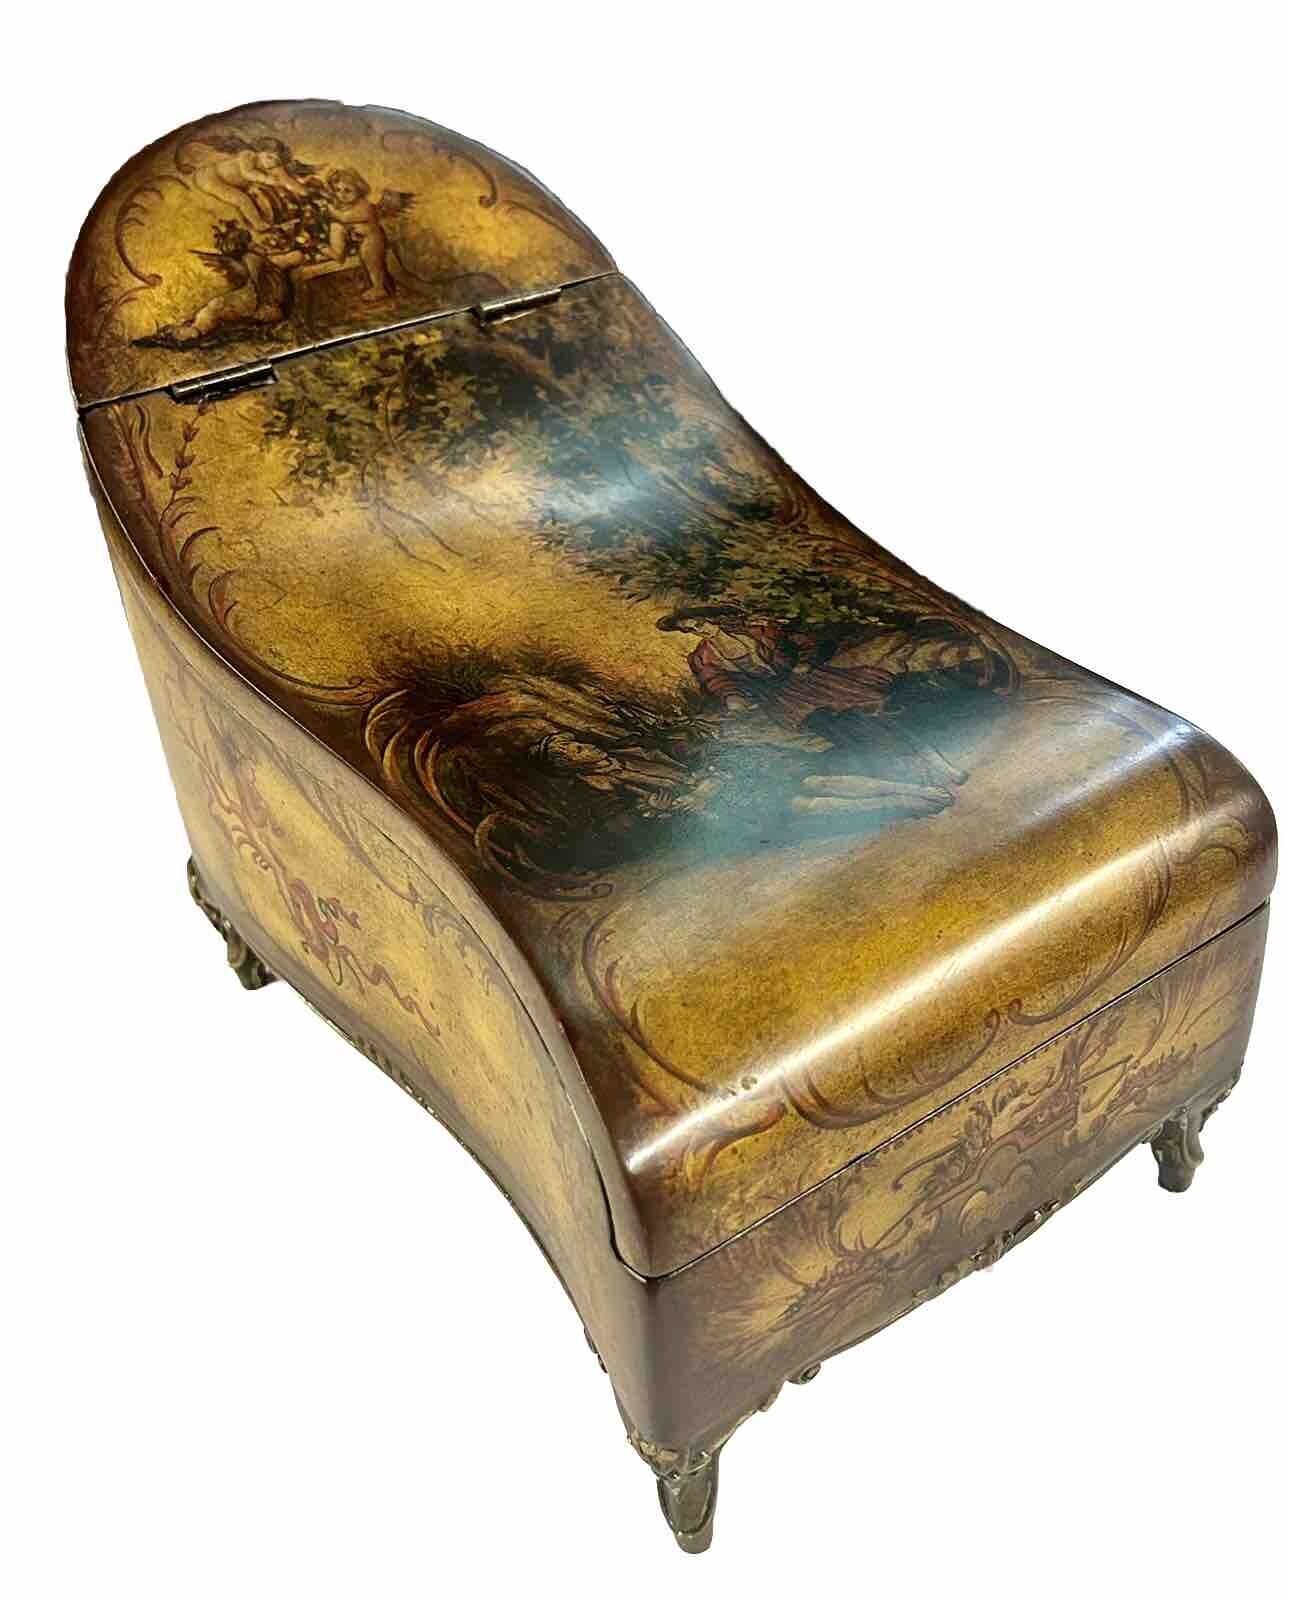 Rare Vintage Chaise Lounge Style  Chinese Wood Jewelry Box Heavy